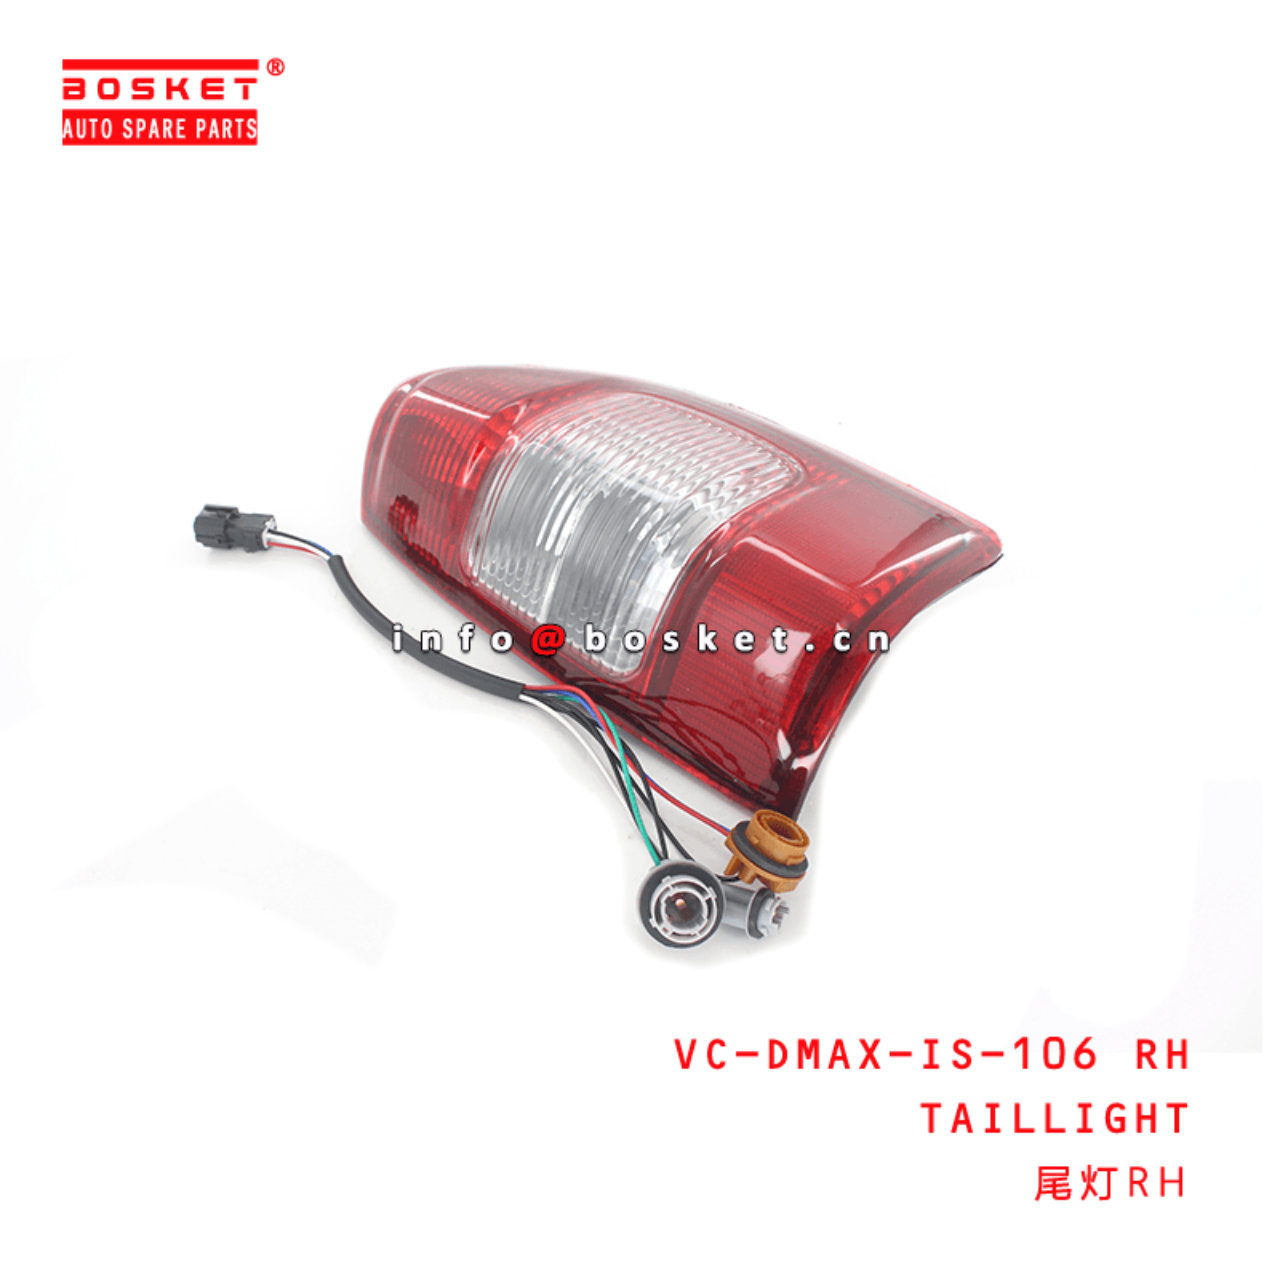  VC-DMAX-IS-106 RH Taillight Suitable for ISUZU D-MAX 02-05 06-08